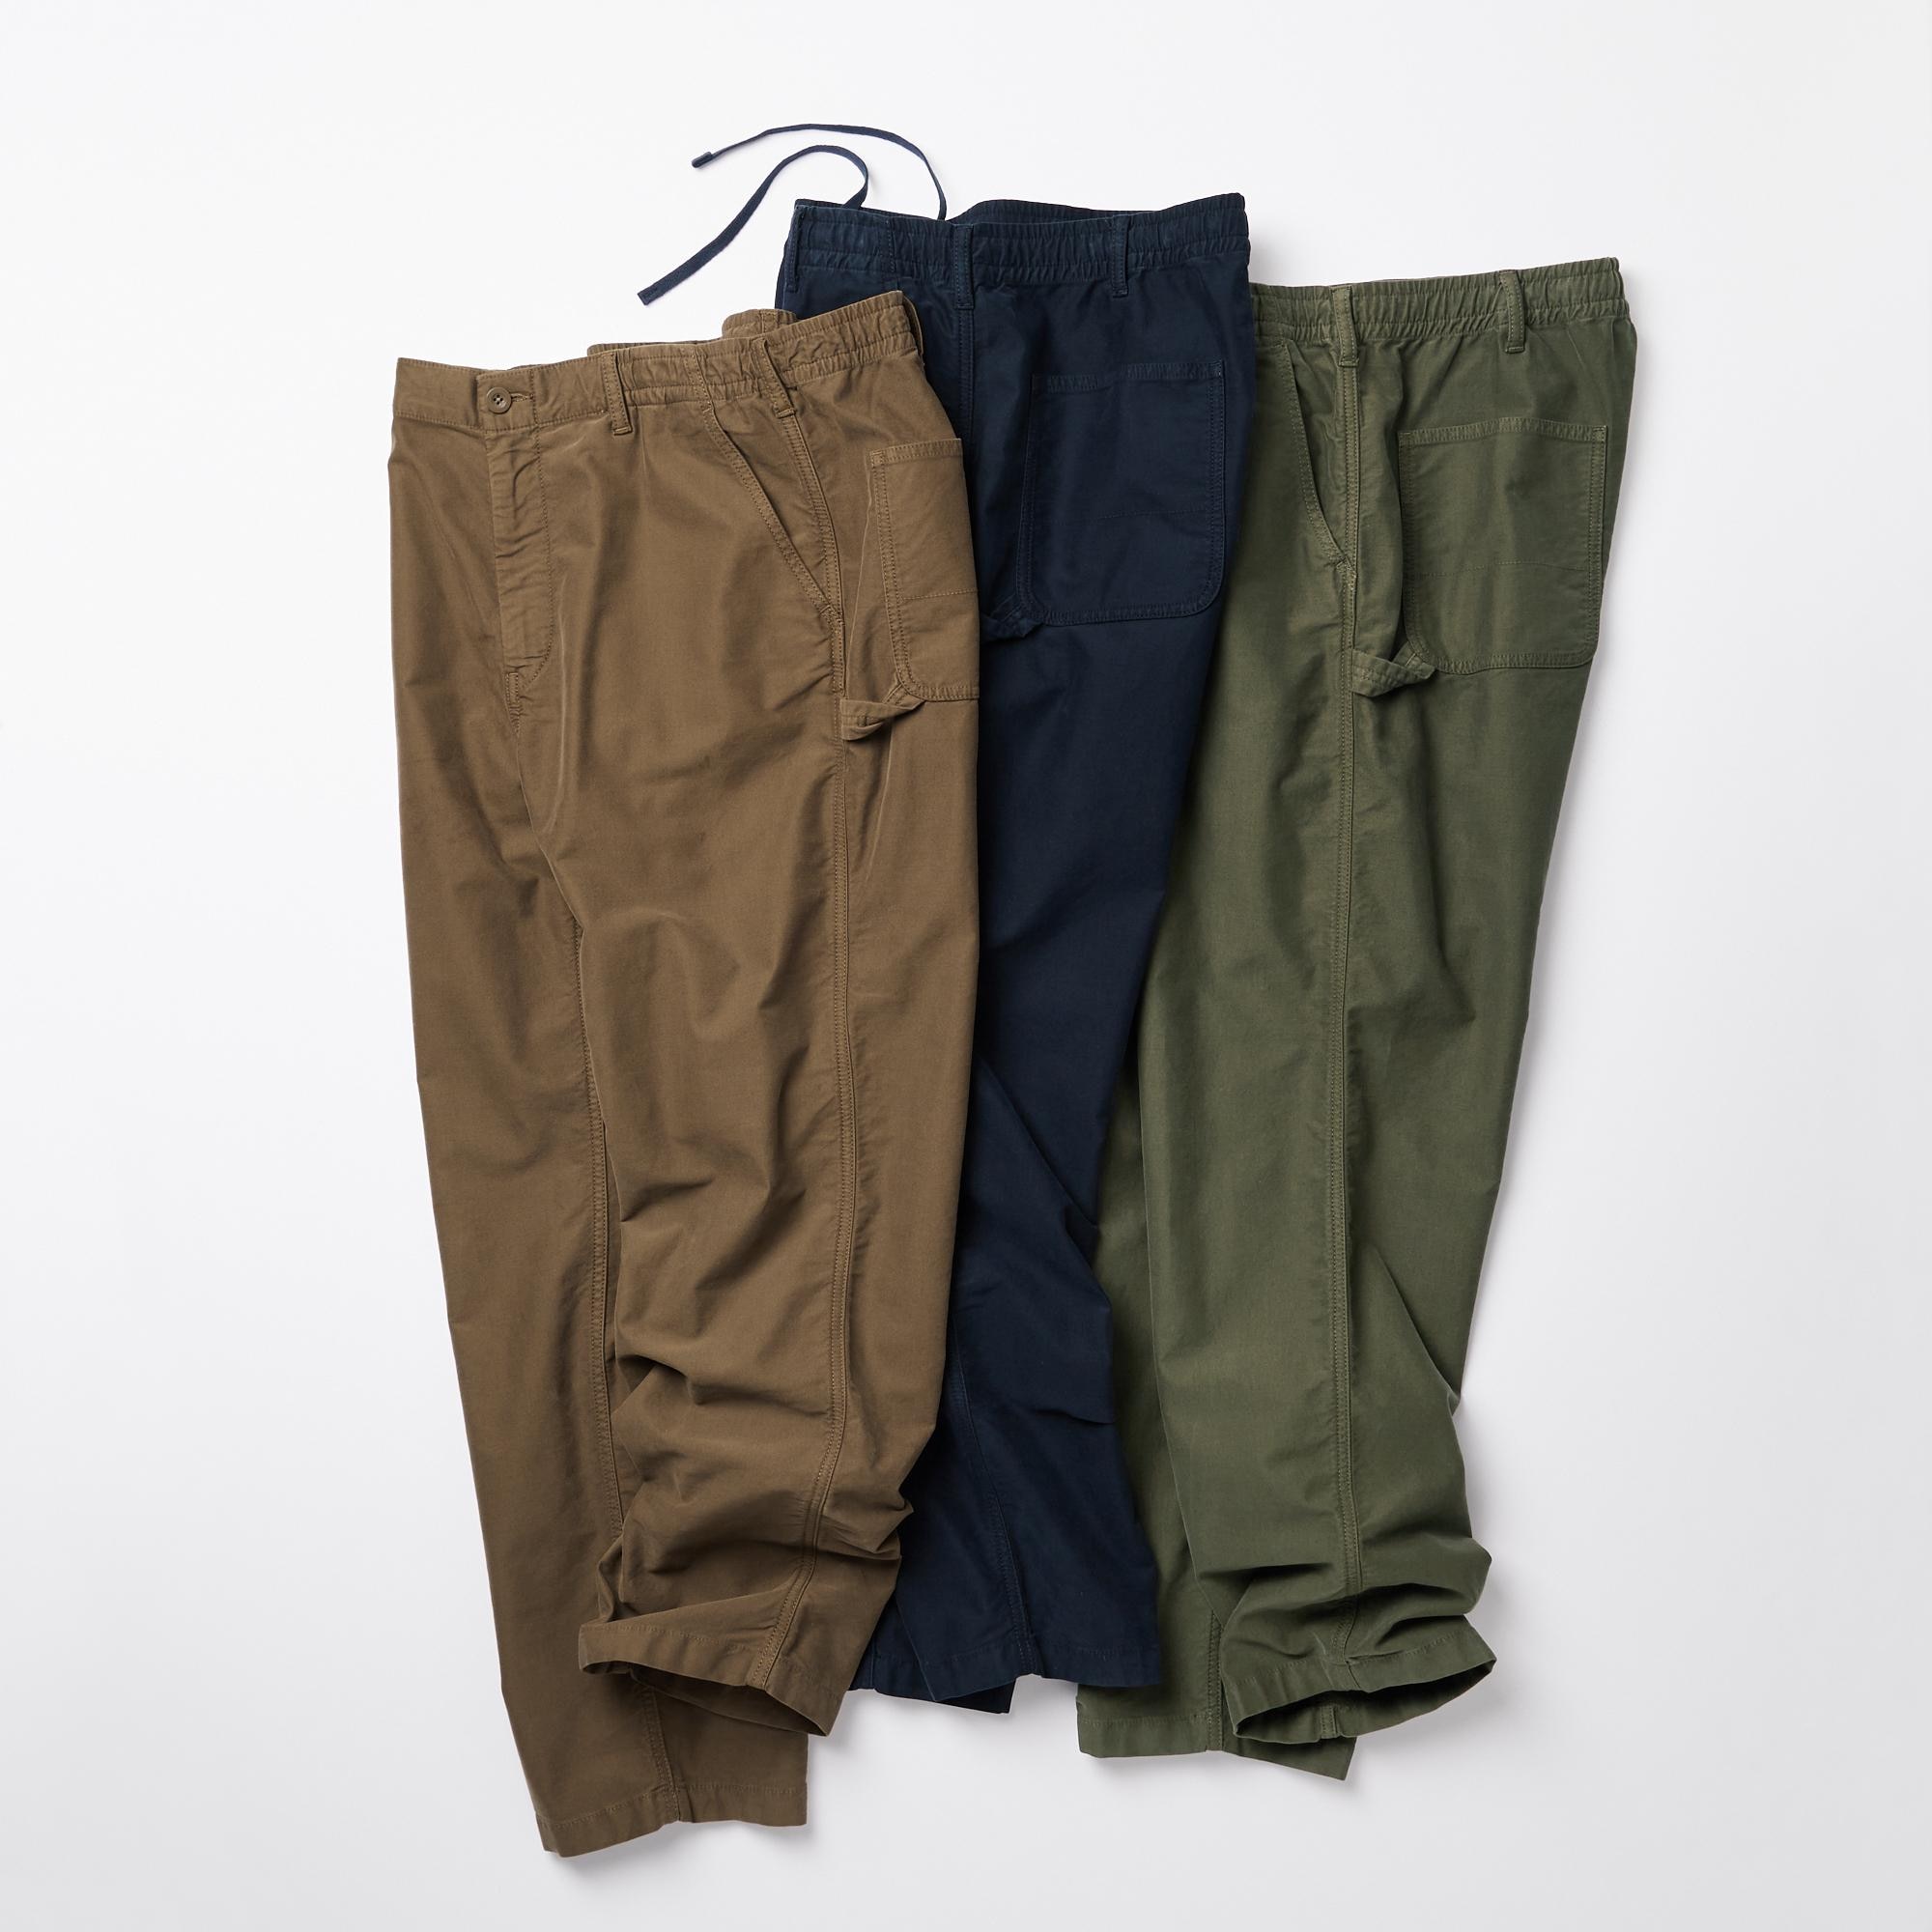 MENS UTILITY WORK PANTS  UNIQLO VN